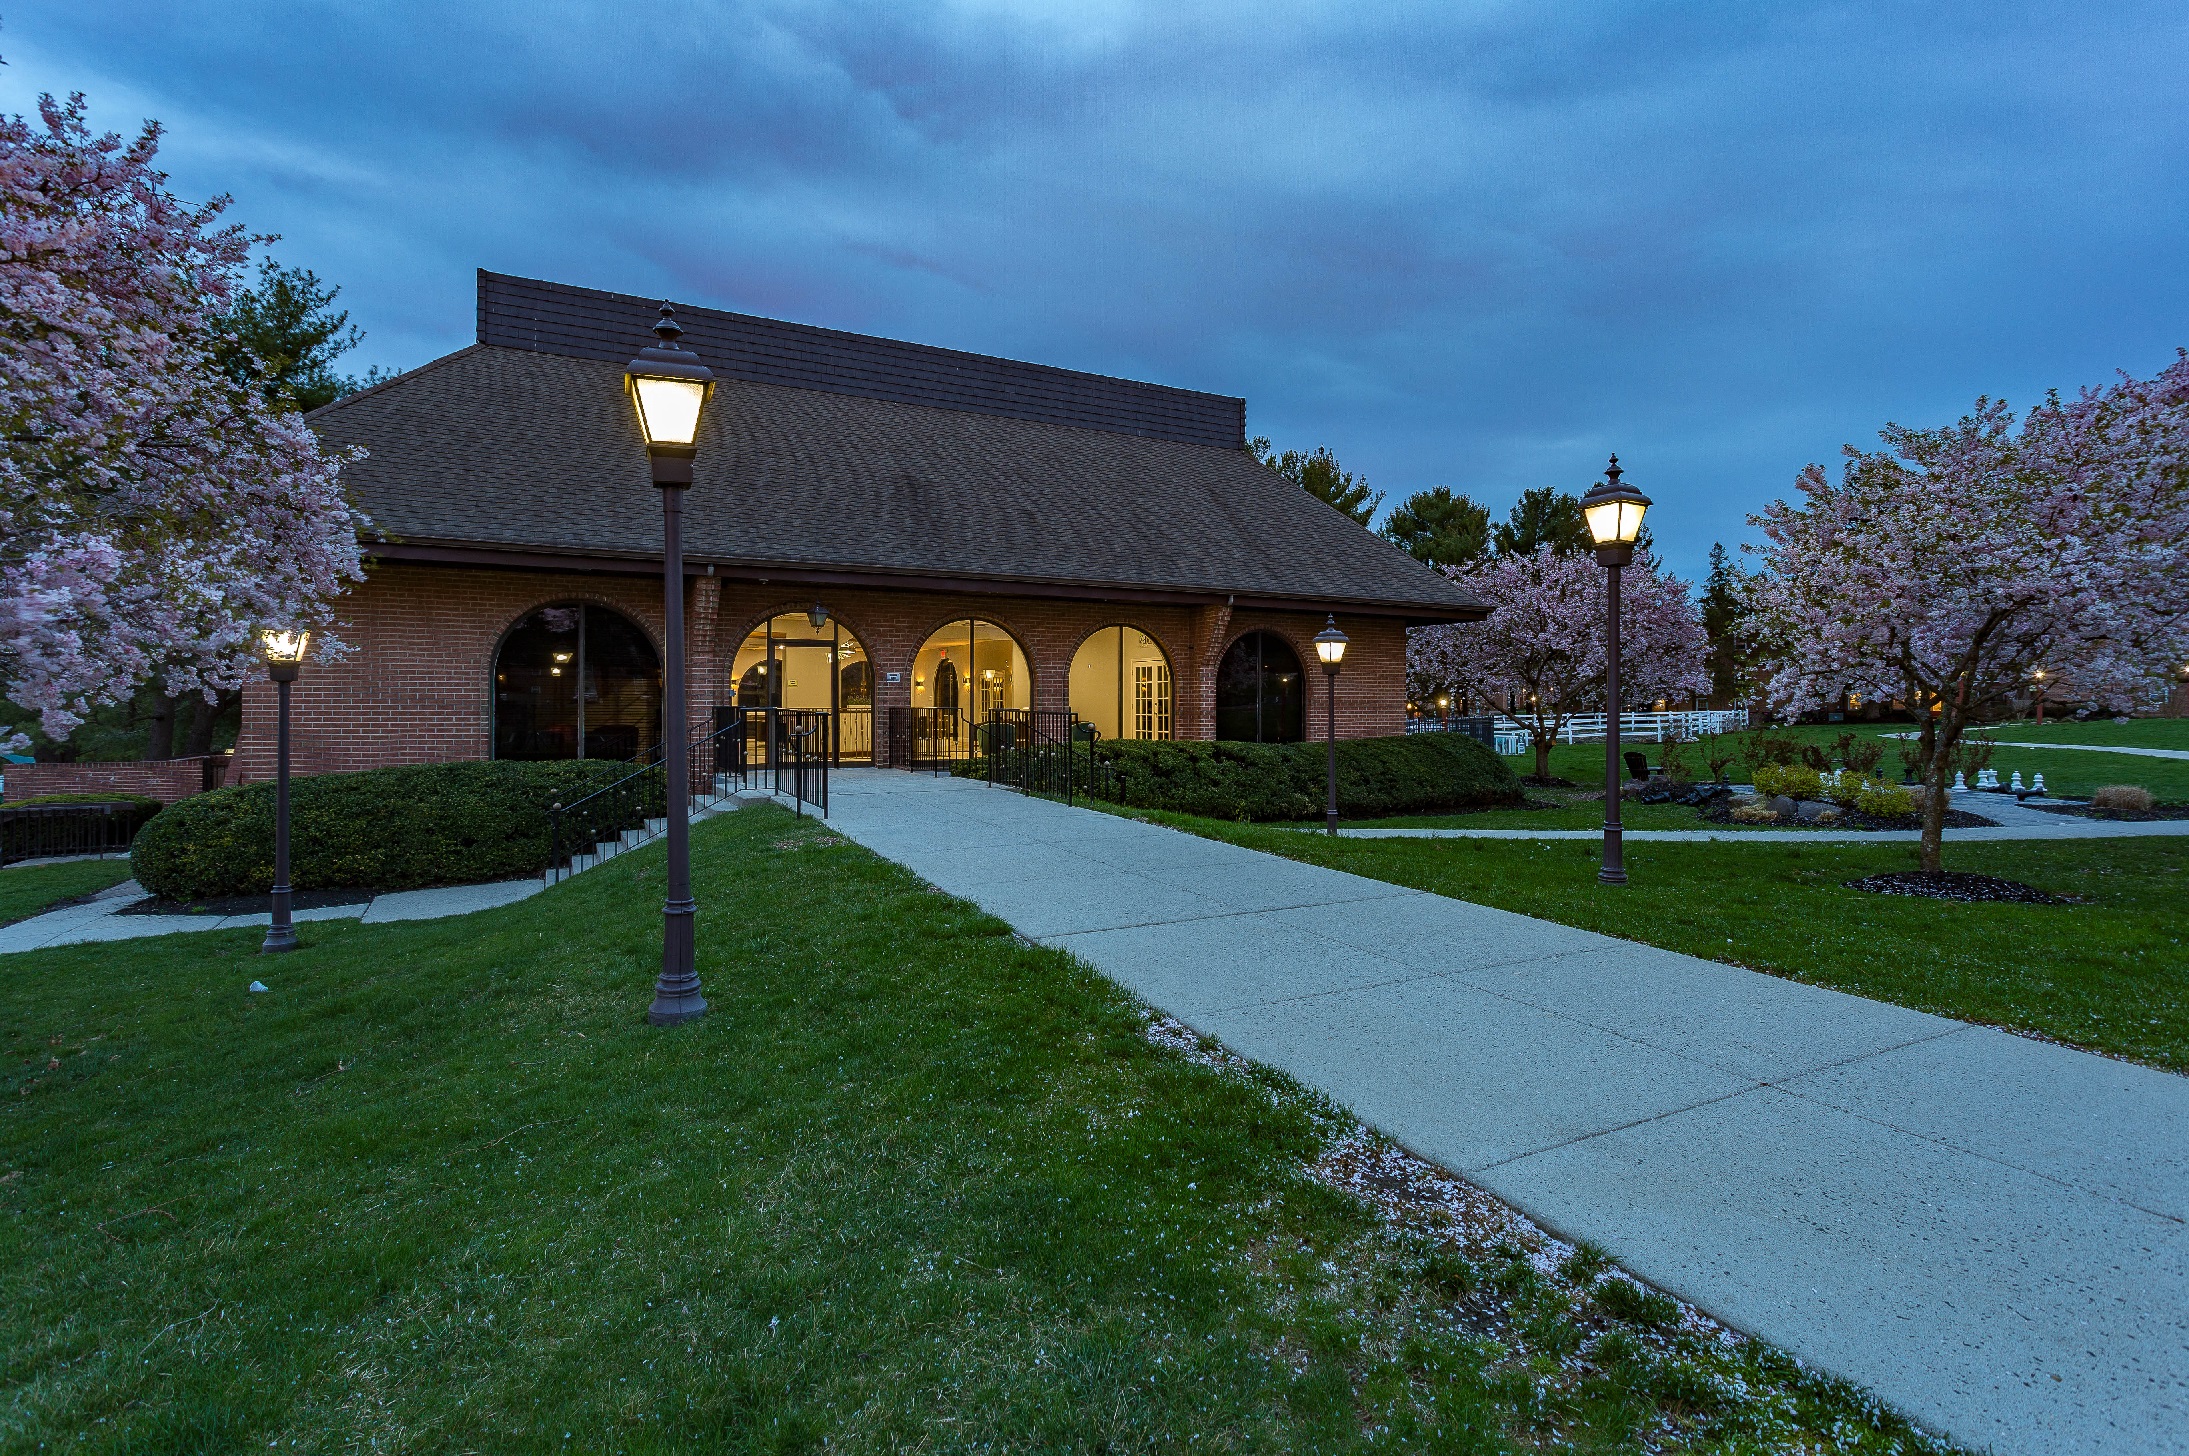 Exterior of Clubhouse, showing lit walkways and landscaped grass and hedges.